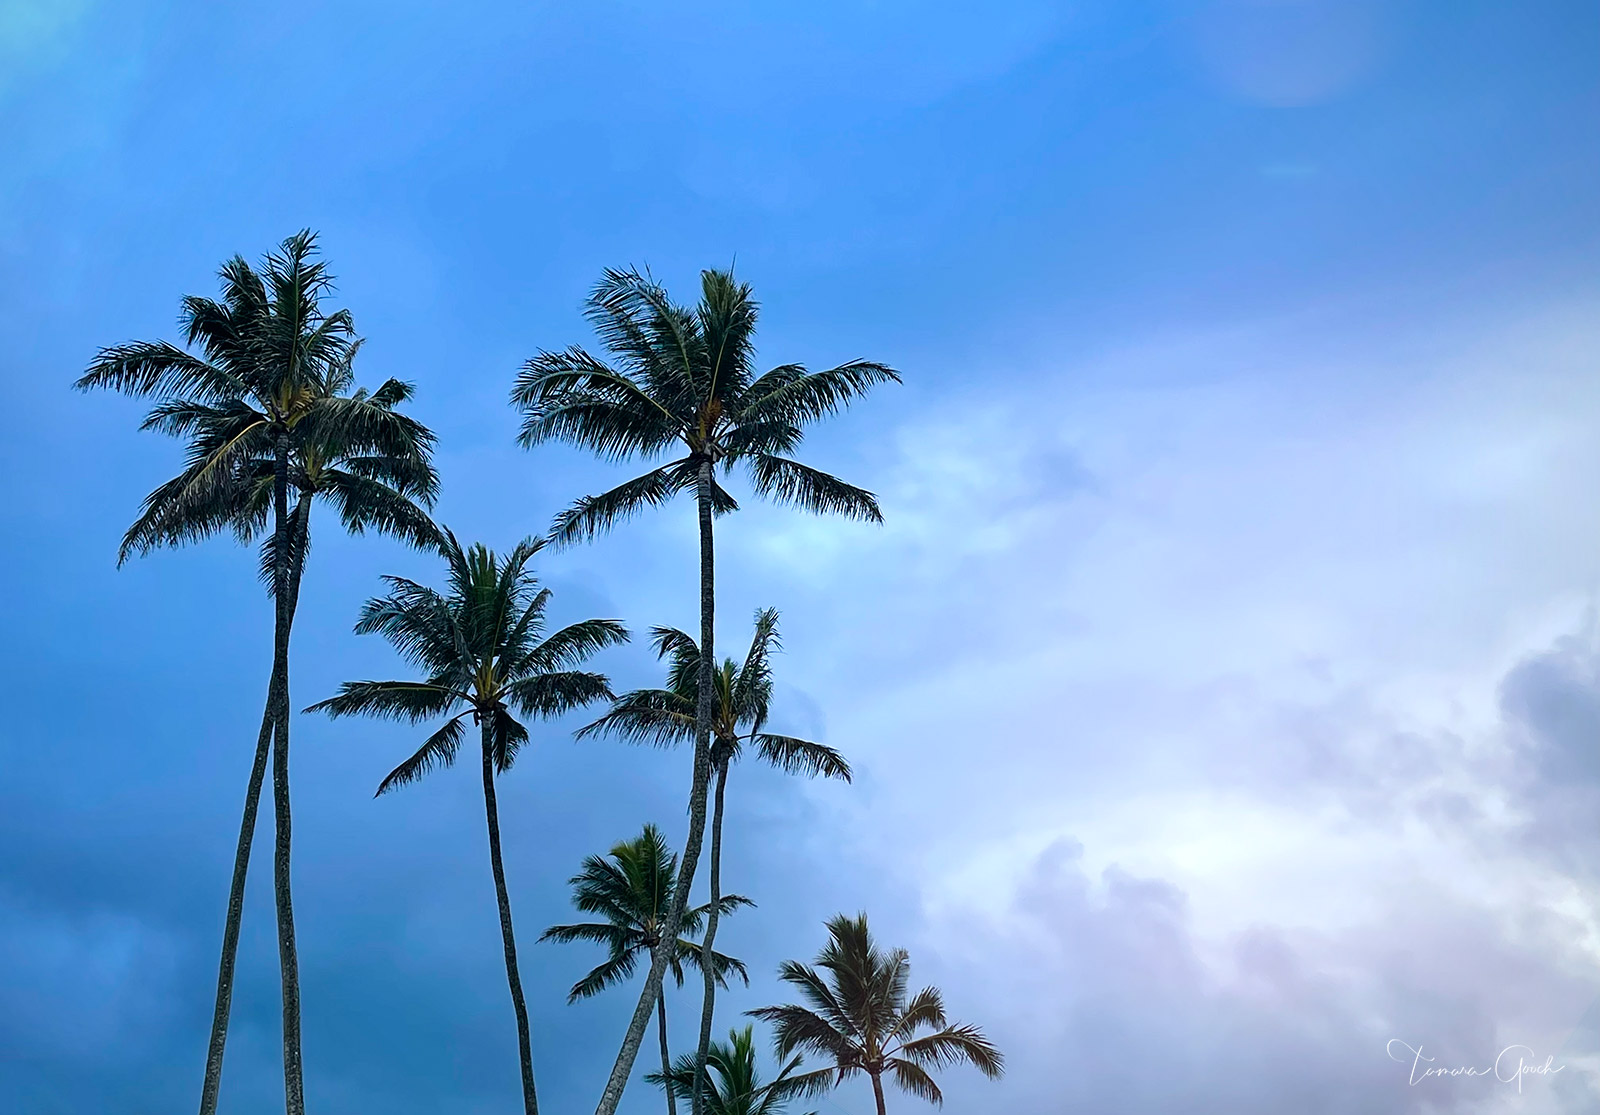 A fine art limited edition print of Palm Trees swaying in the warm breezes of Hawaii.